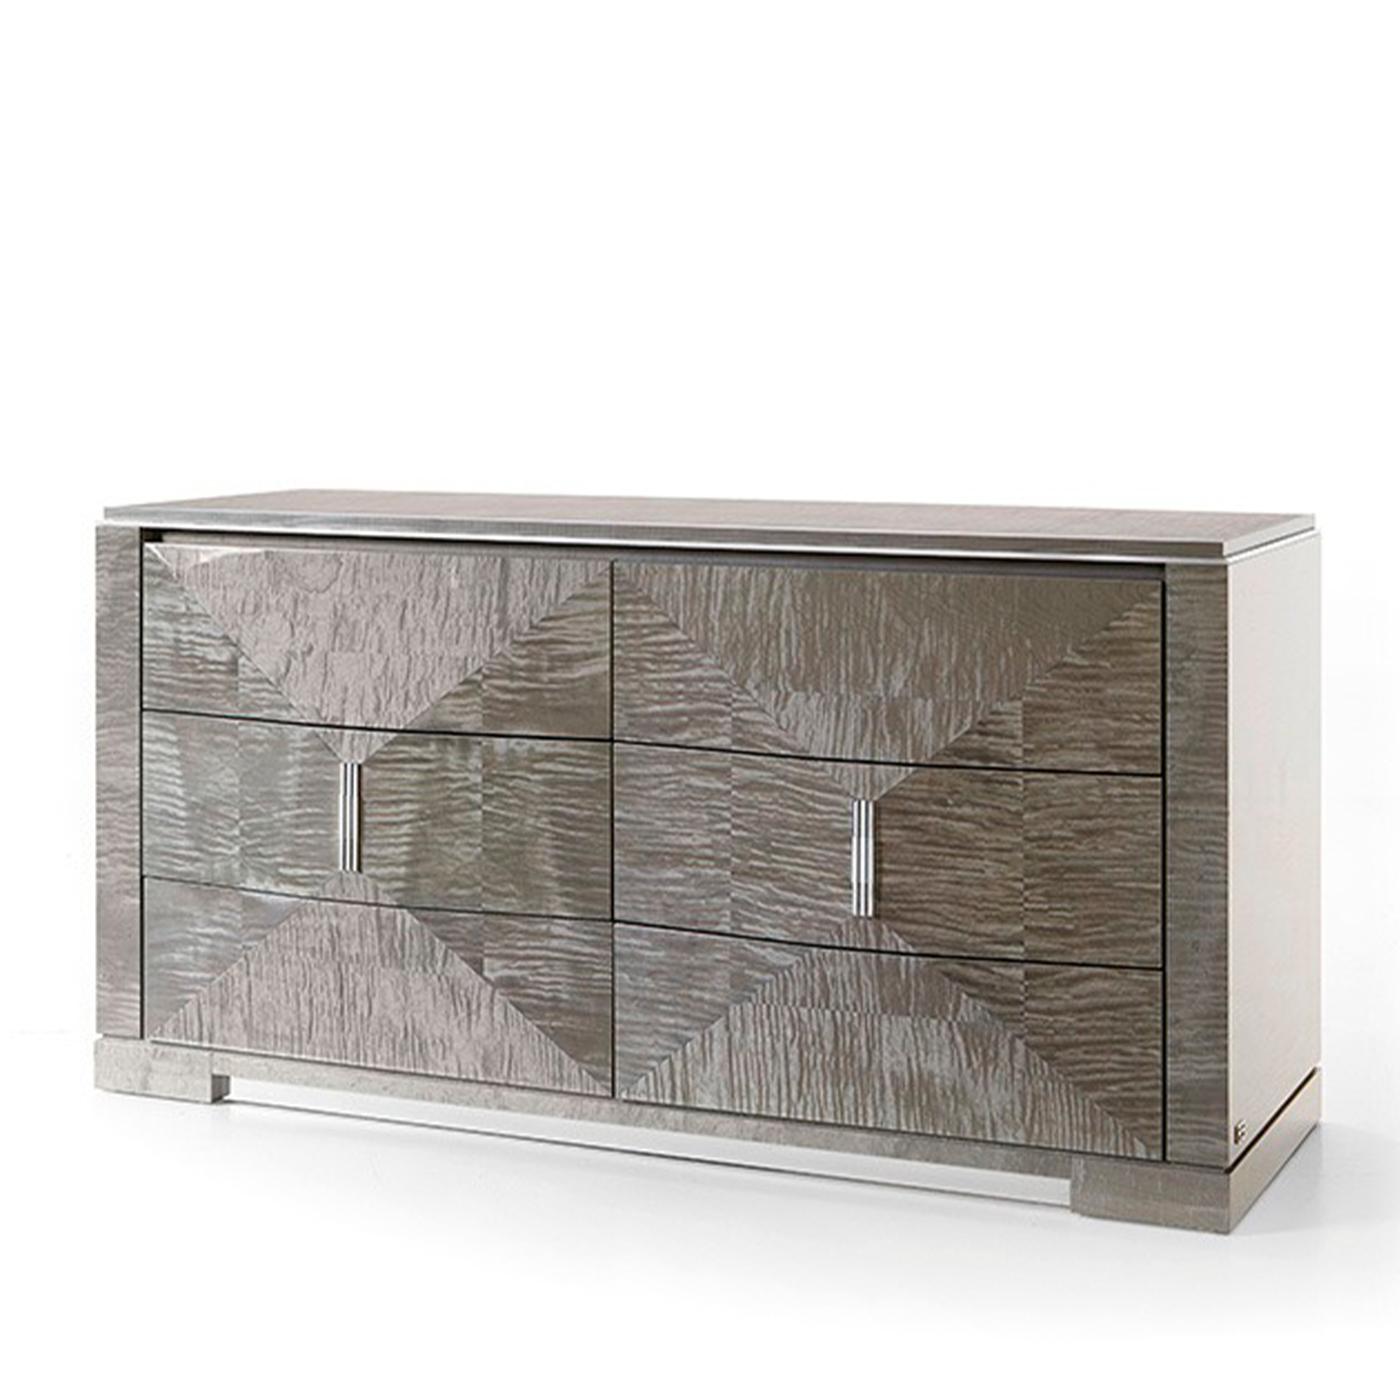 Chest of 6 drawers with metal trims and push pull opening, Characterized by Lupo glossy finish and an Econabuk Meringa 45 internal upholstery, details are made of Chrome metal.